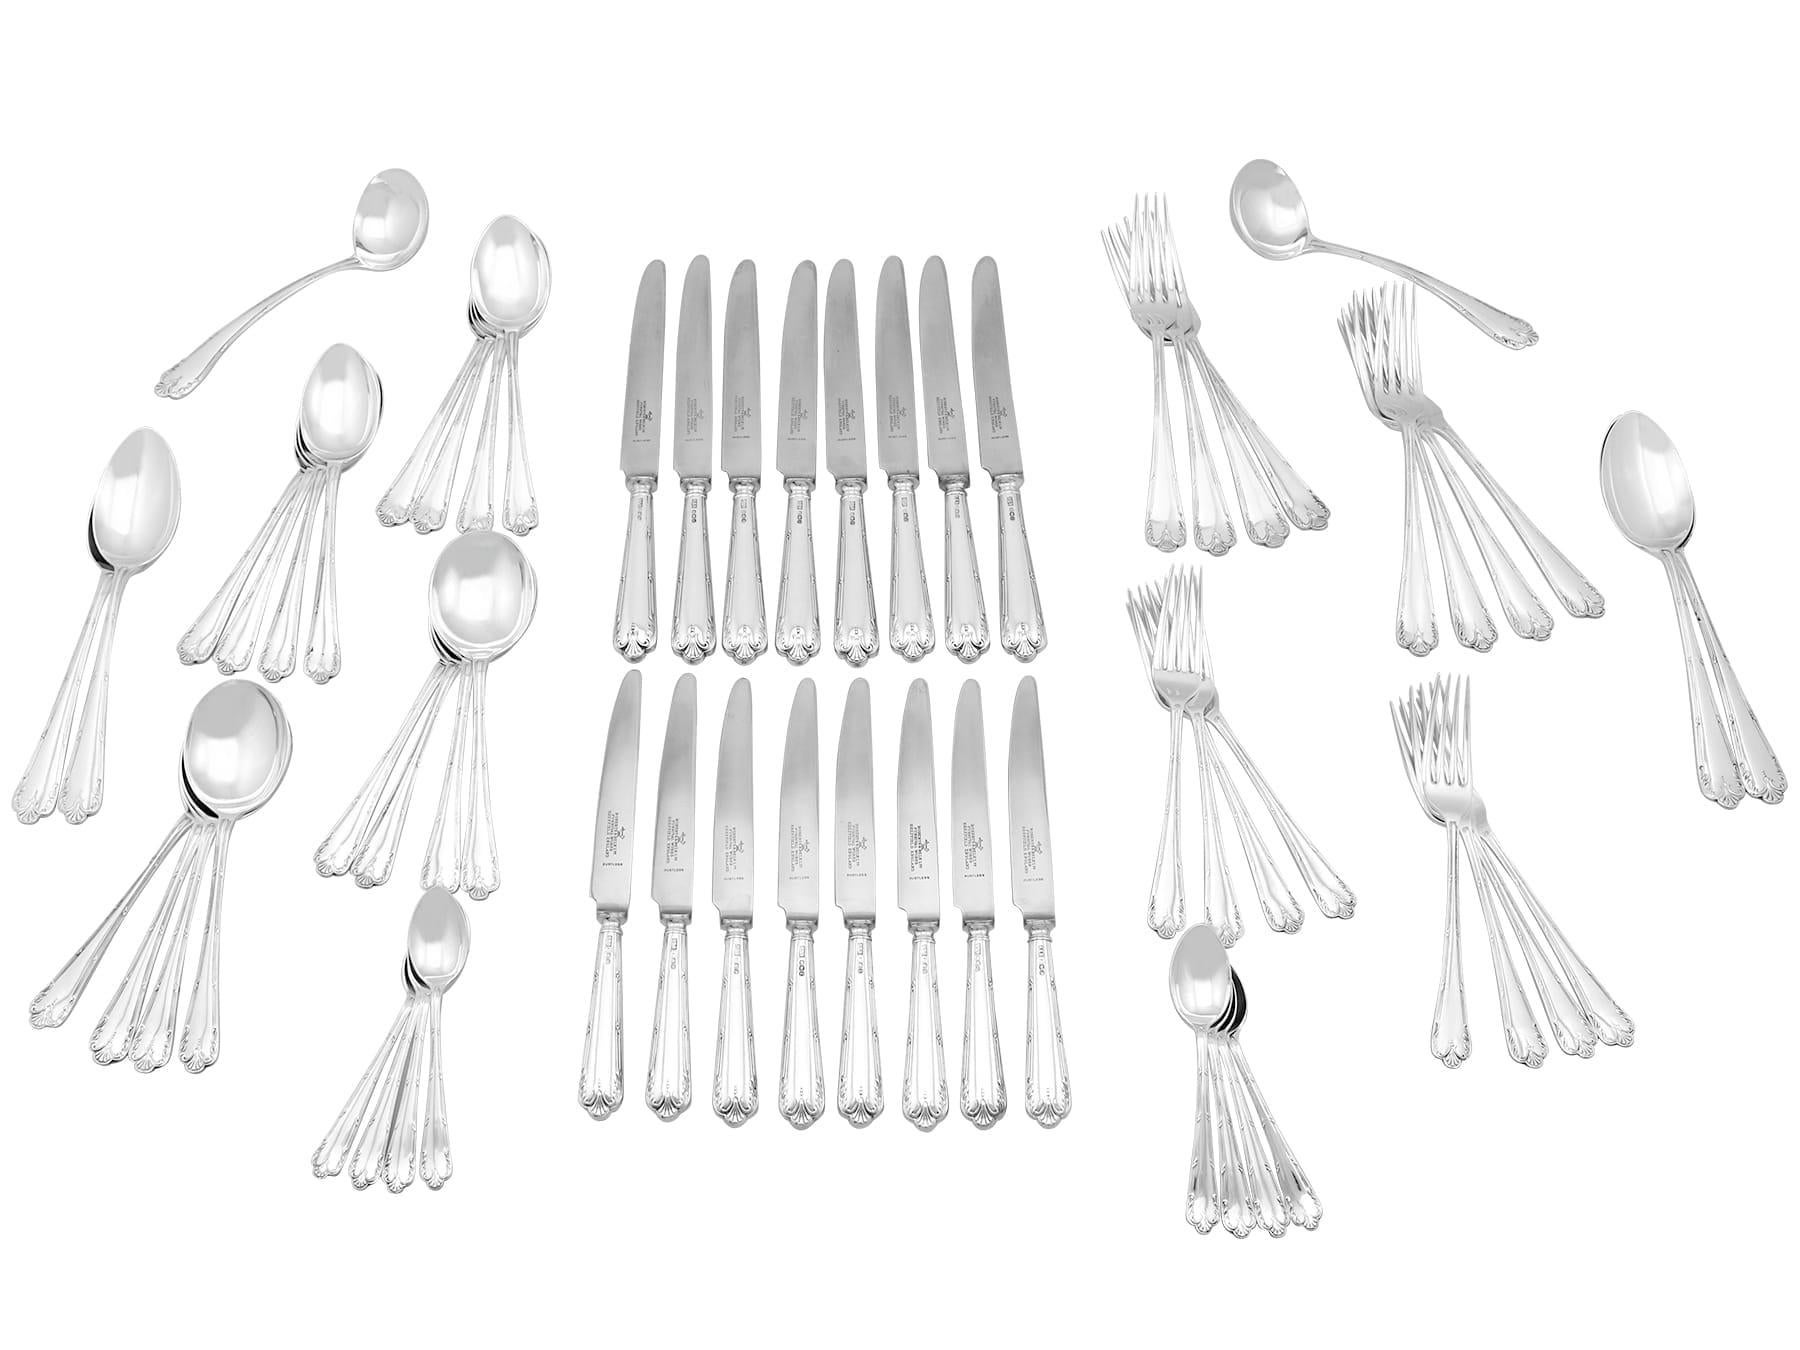 The pieces of this exceptional vintage sterling silver flatware set for eight persons have been crafted in the Louis Seize pattern*.

The surface of each rounded handle is embellished with reed and ribbon paralleling borders accented with an